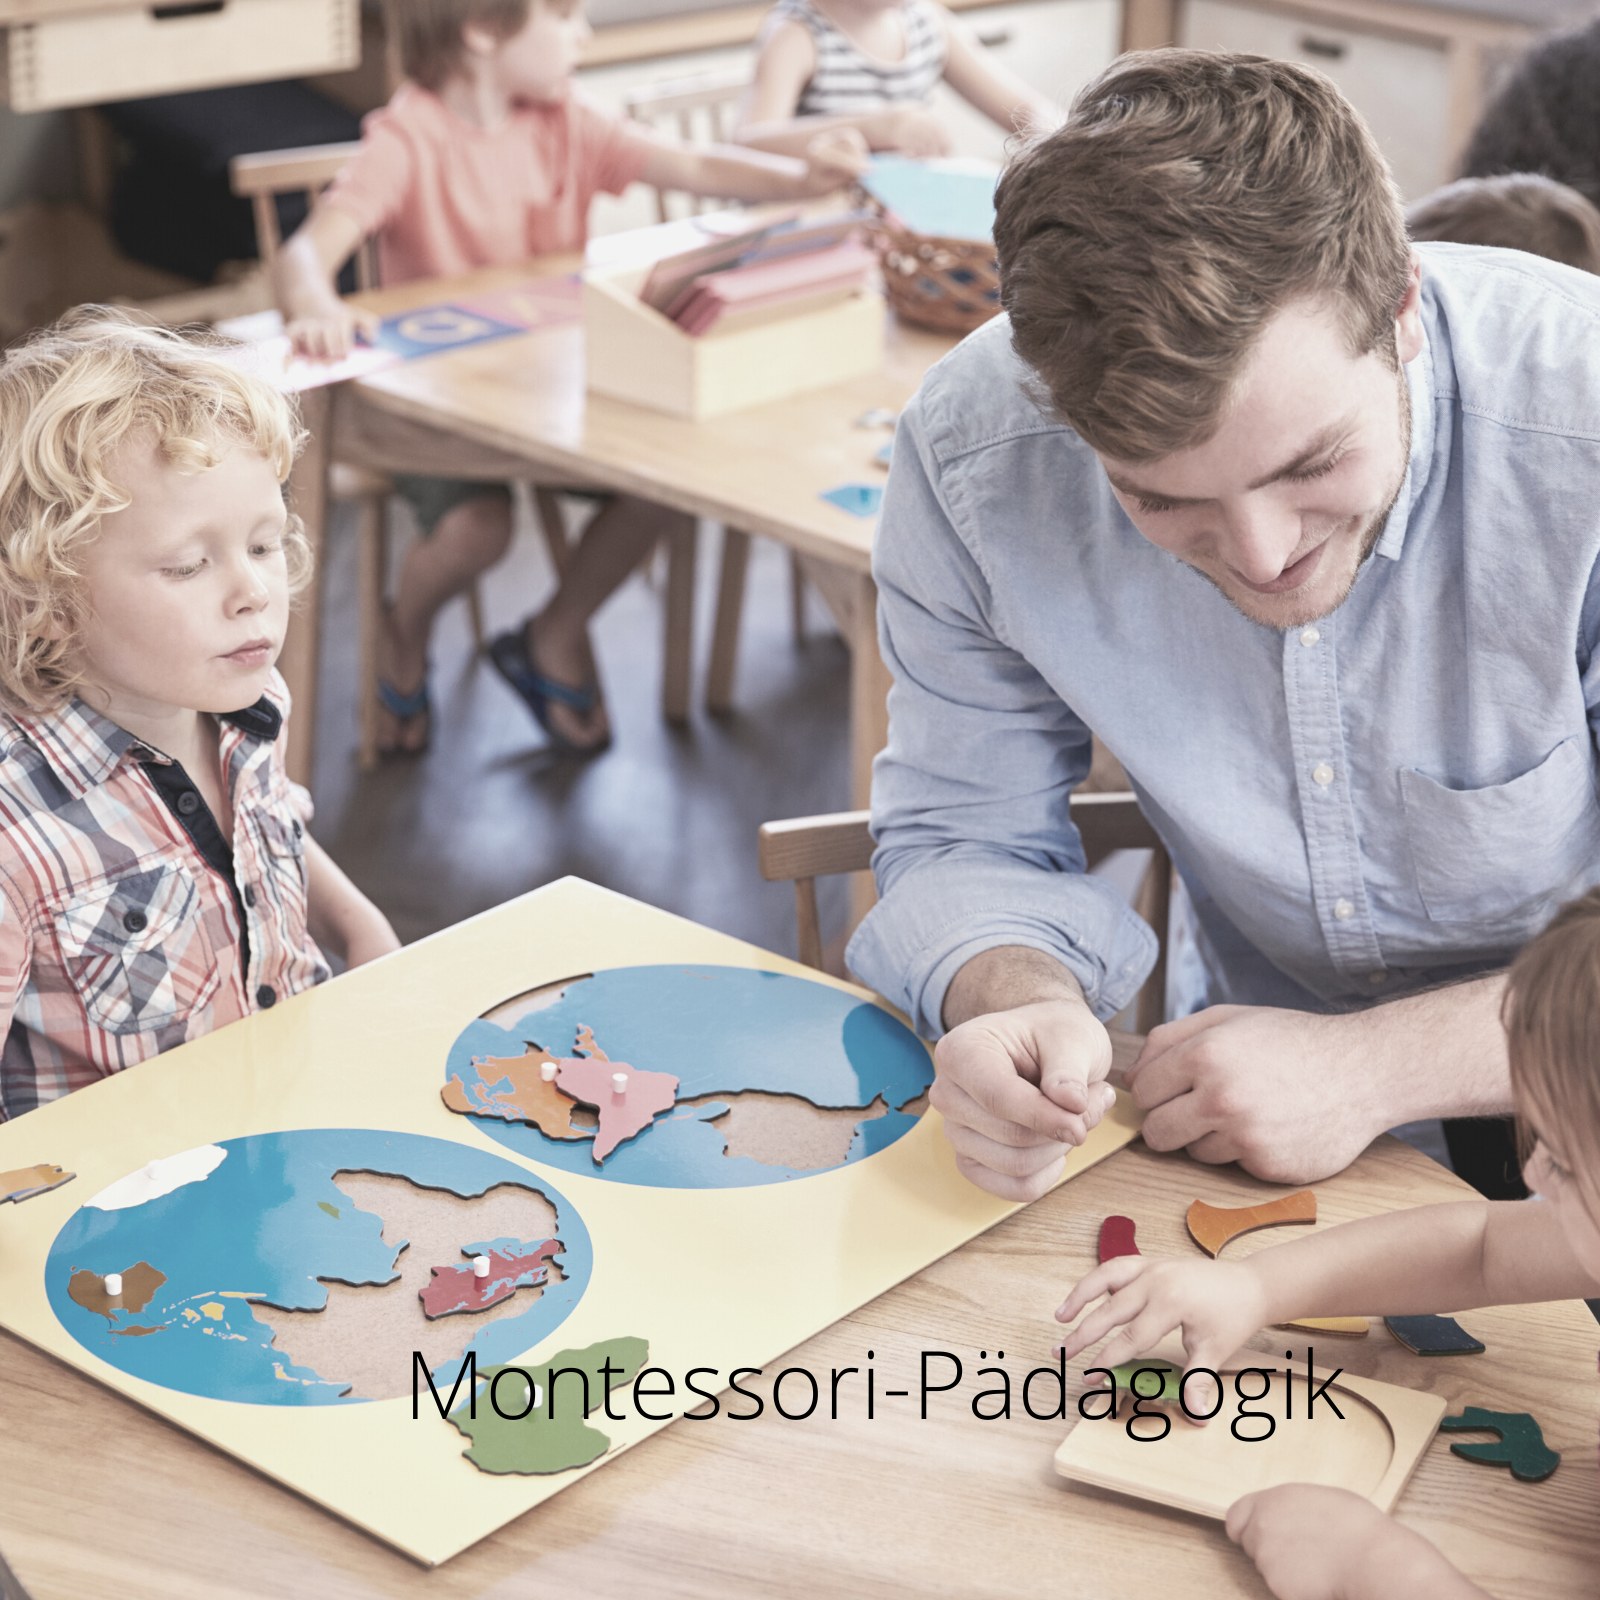 "Montessori pedagogy, what is that actually?"